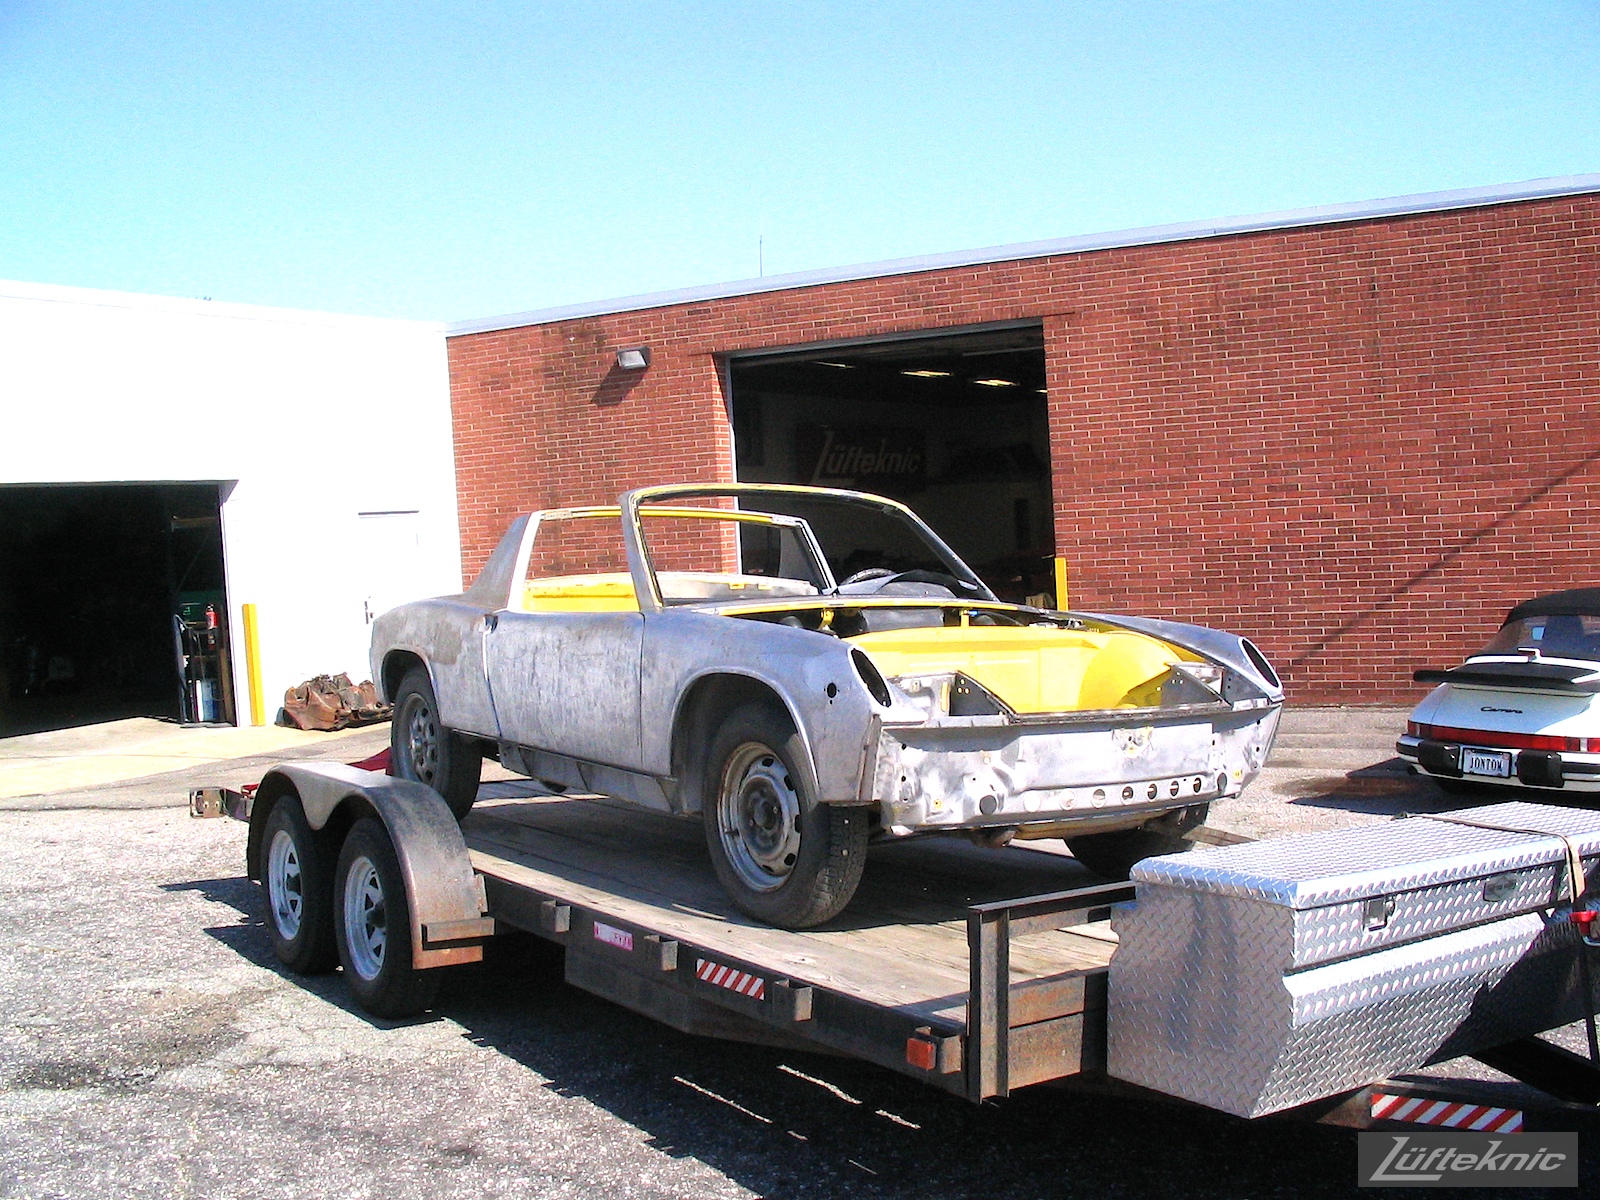 A stripped down yellow Porsche 914 shown mid-restoration on a trailer in the parking lot of Lufteknic.